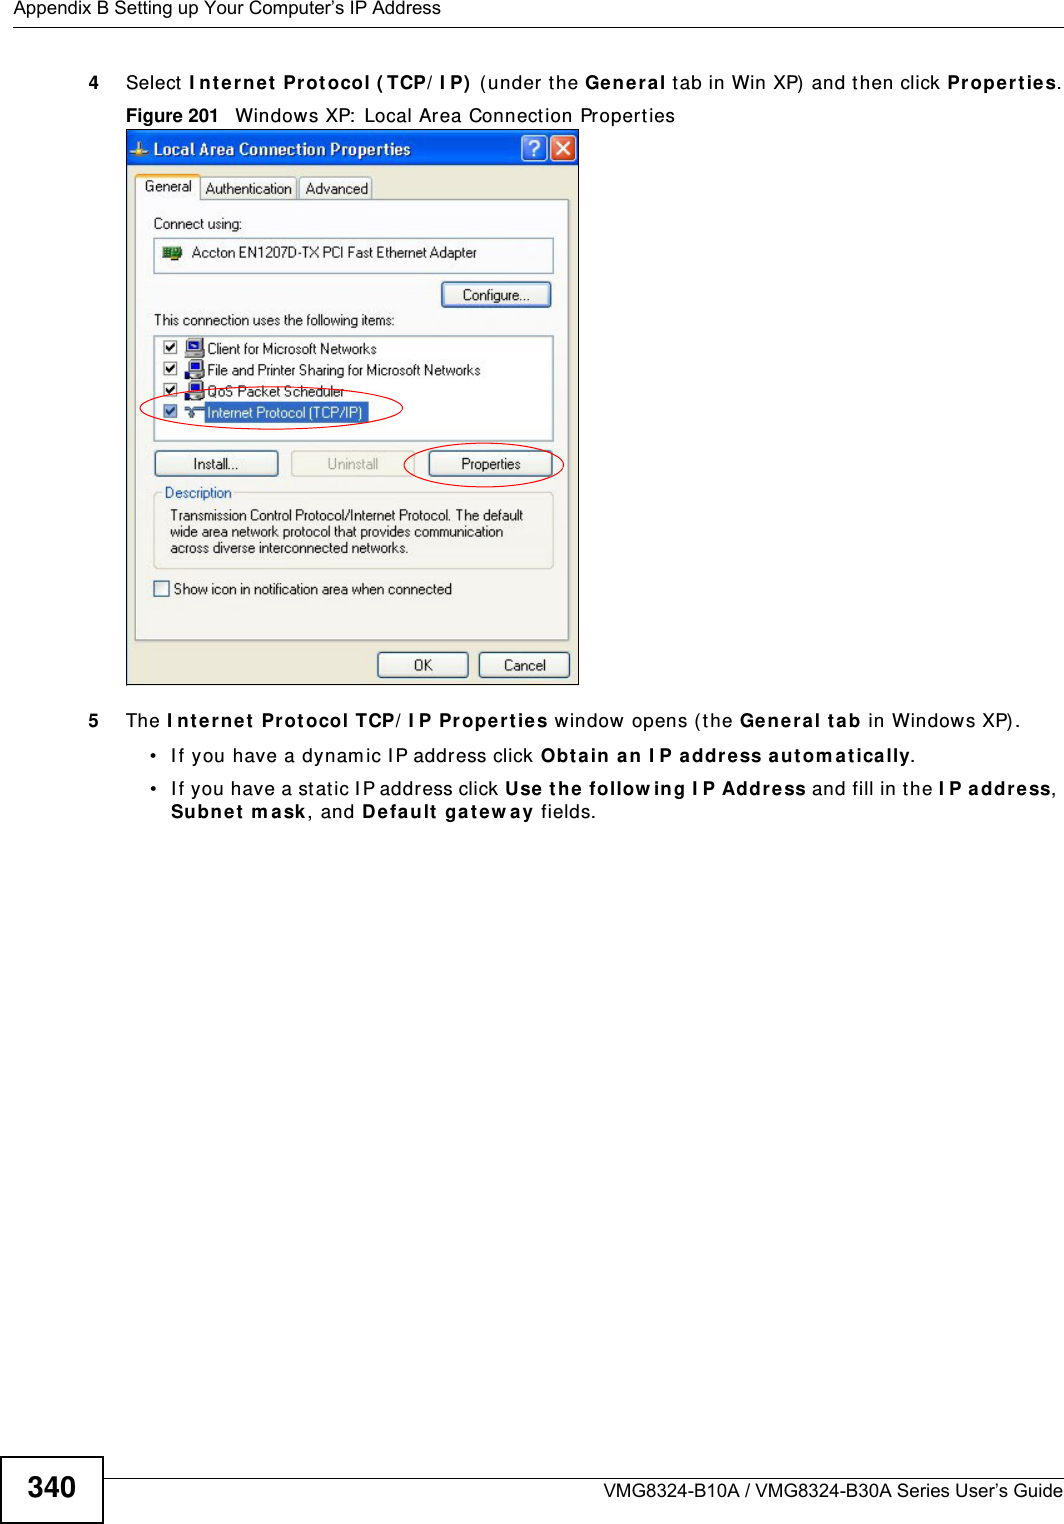 Appendix B Setting up Your Computer’s IP AddressVMG8324-B10A / VMG8324-B30A Series User’s Guide3404Select I nte rnet  Protocol ( TCP/ I P)  (under the Gen era l tab in Win XP) and t hen click Pr ope rt ie s.Figure 201   Windows XP:  Local Area Connection Proper t ies5The I nt erne t Prot ocol TCP/ I P Pr oper ties window  opens ( the Ge nera l ta b in Windows XP) .• I f you have a dynam ic I P address click Obta in an I P a ddr ess au tom a tica lly.• I f you have a st atic I P address click Use the  follow ing I P Addre ss and fill in the I P a ddr ess, Subnet  m a sk , and Default ga te w ay fields. 